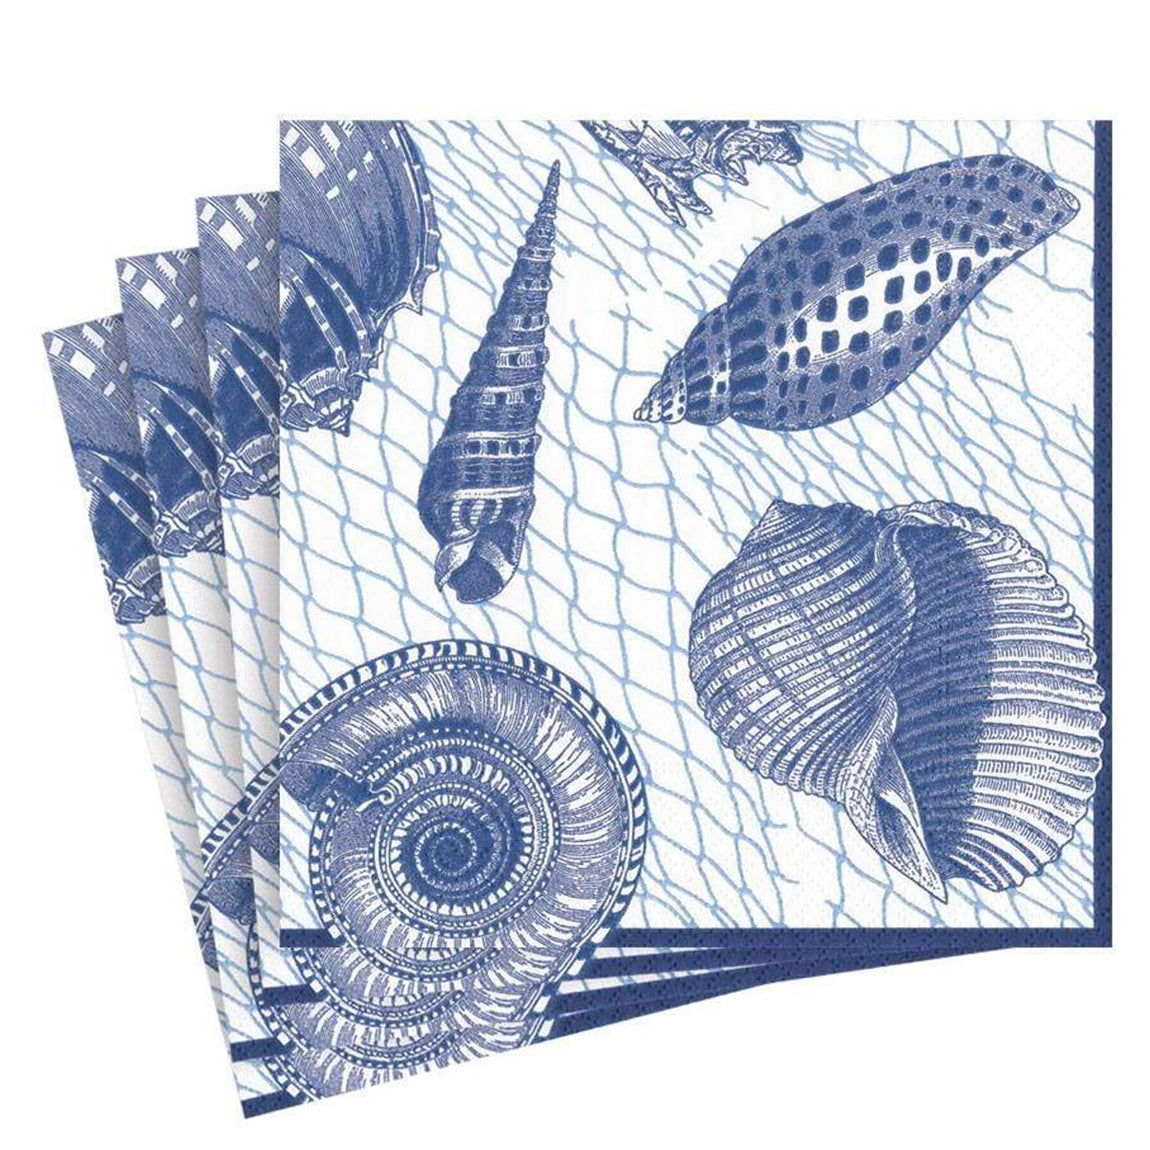 Netting and Shells Blue Luncheon Napkins